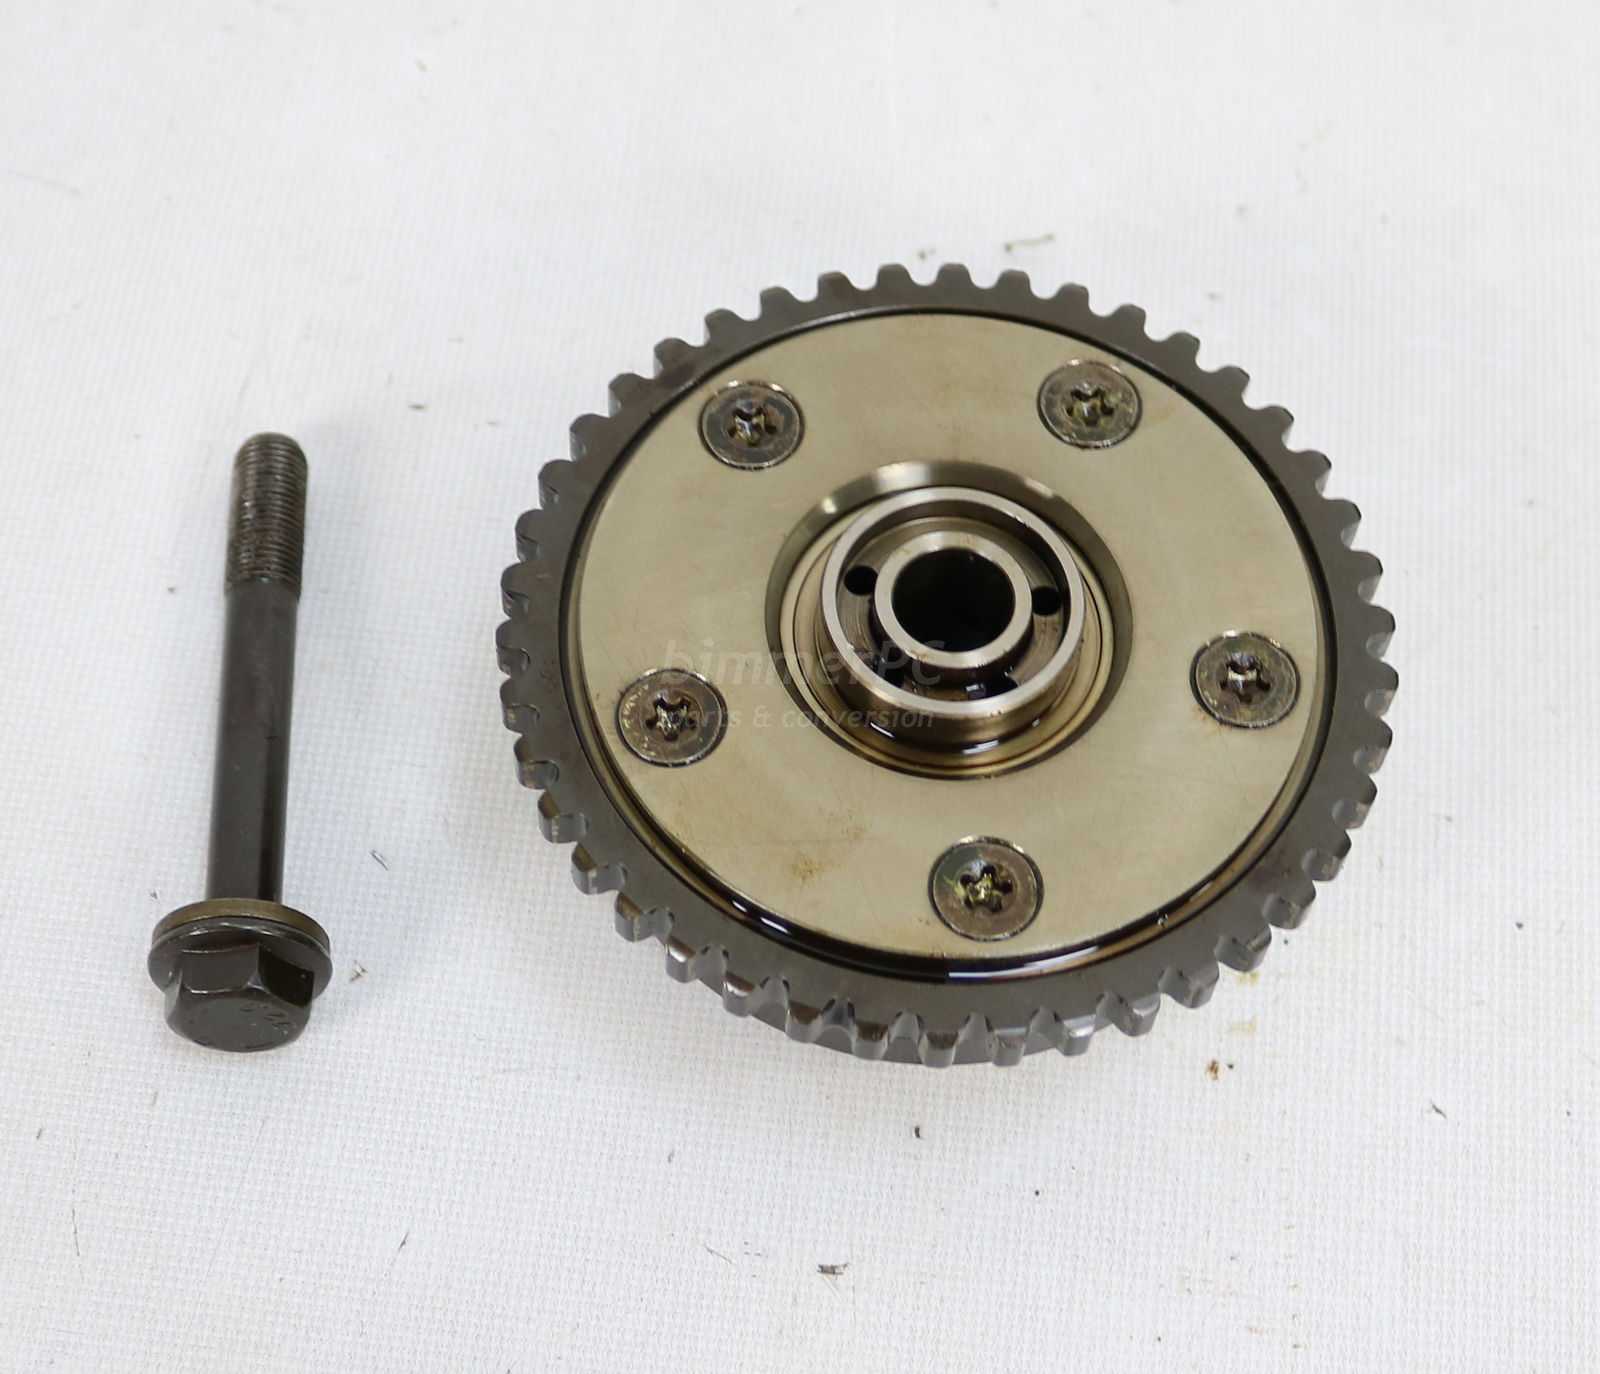 Picture of BMW 11367534718 Vanos Outlet Exhaust Camshaft Adjustment Unit Gear Bank 1 Cyl 1-4 N62 N62n E60 E63 E64 E65 E66 E70 E53 for sale